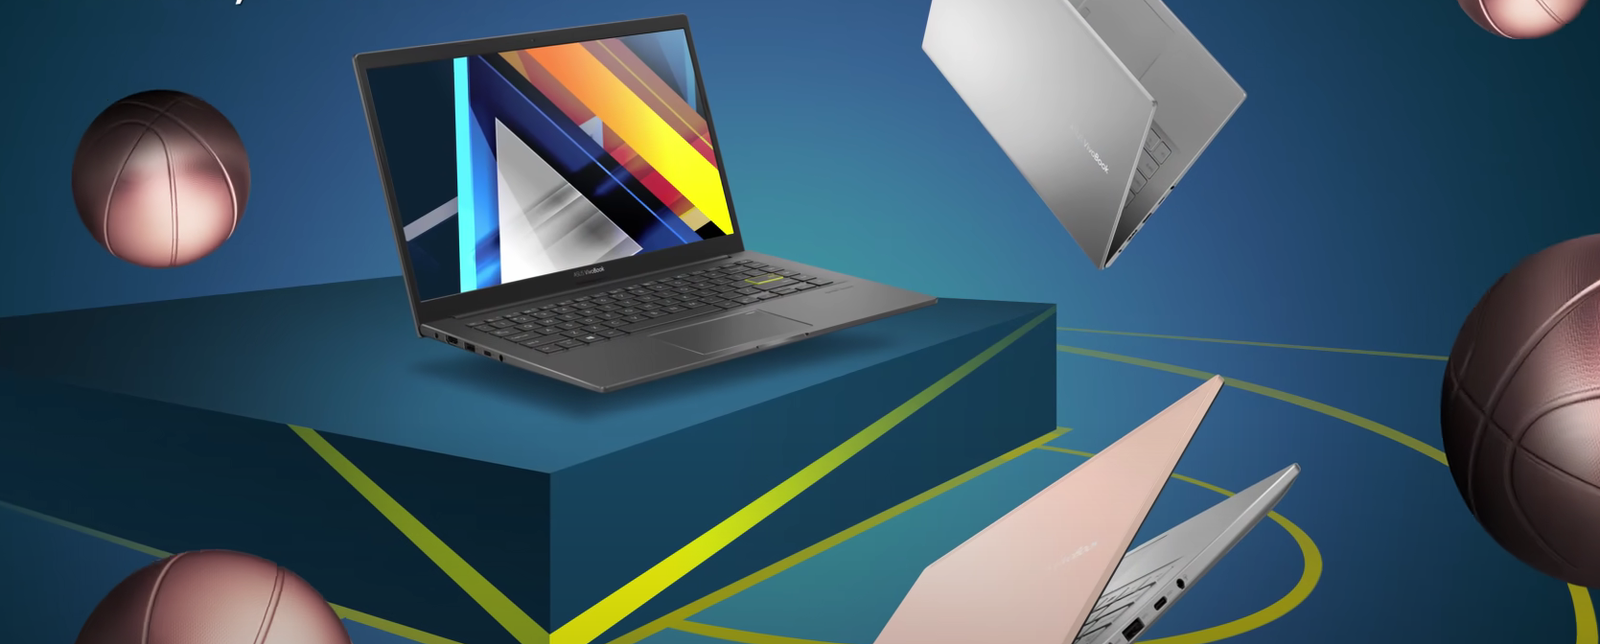 Act fast, and get a new ASUS VivoBook 15 for just $329